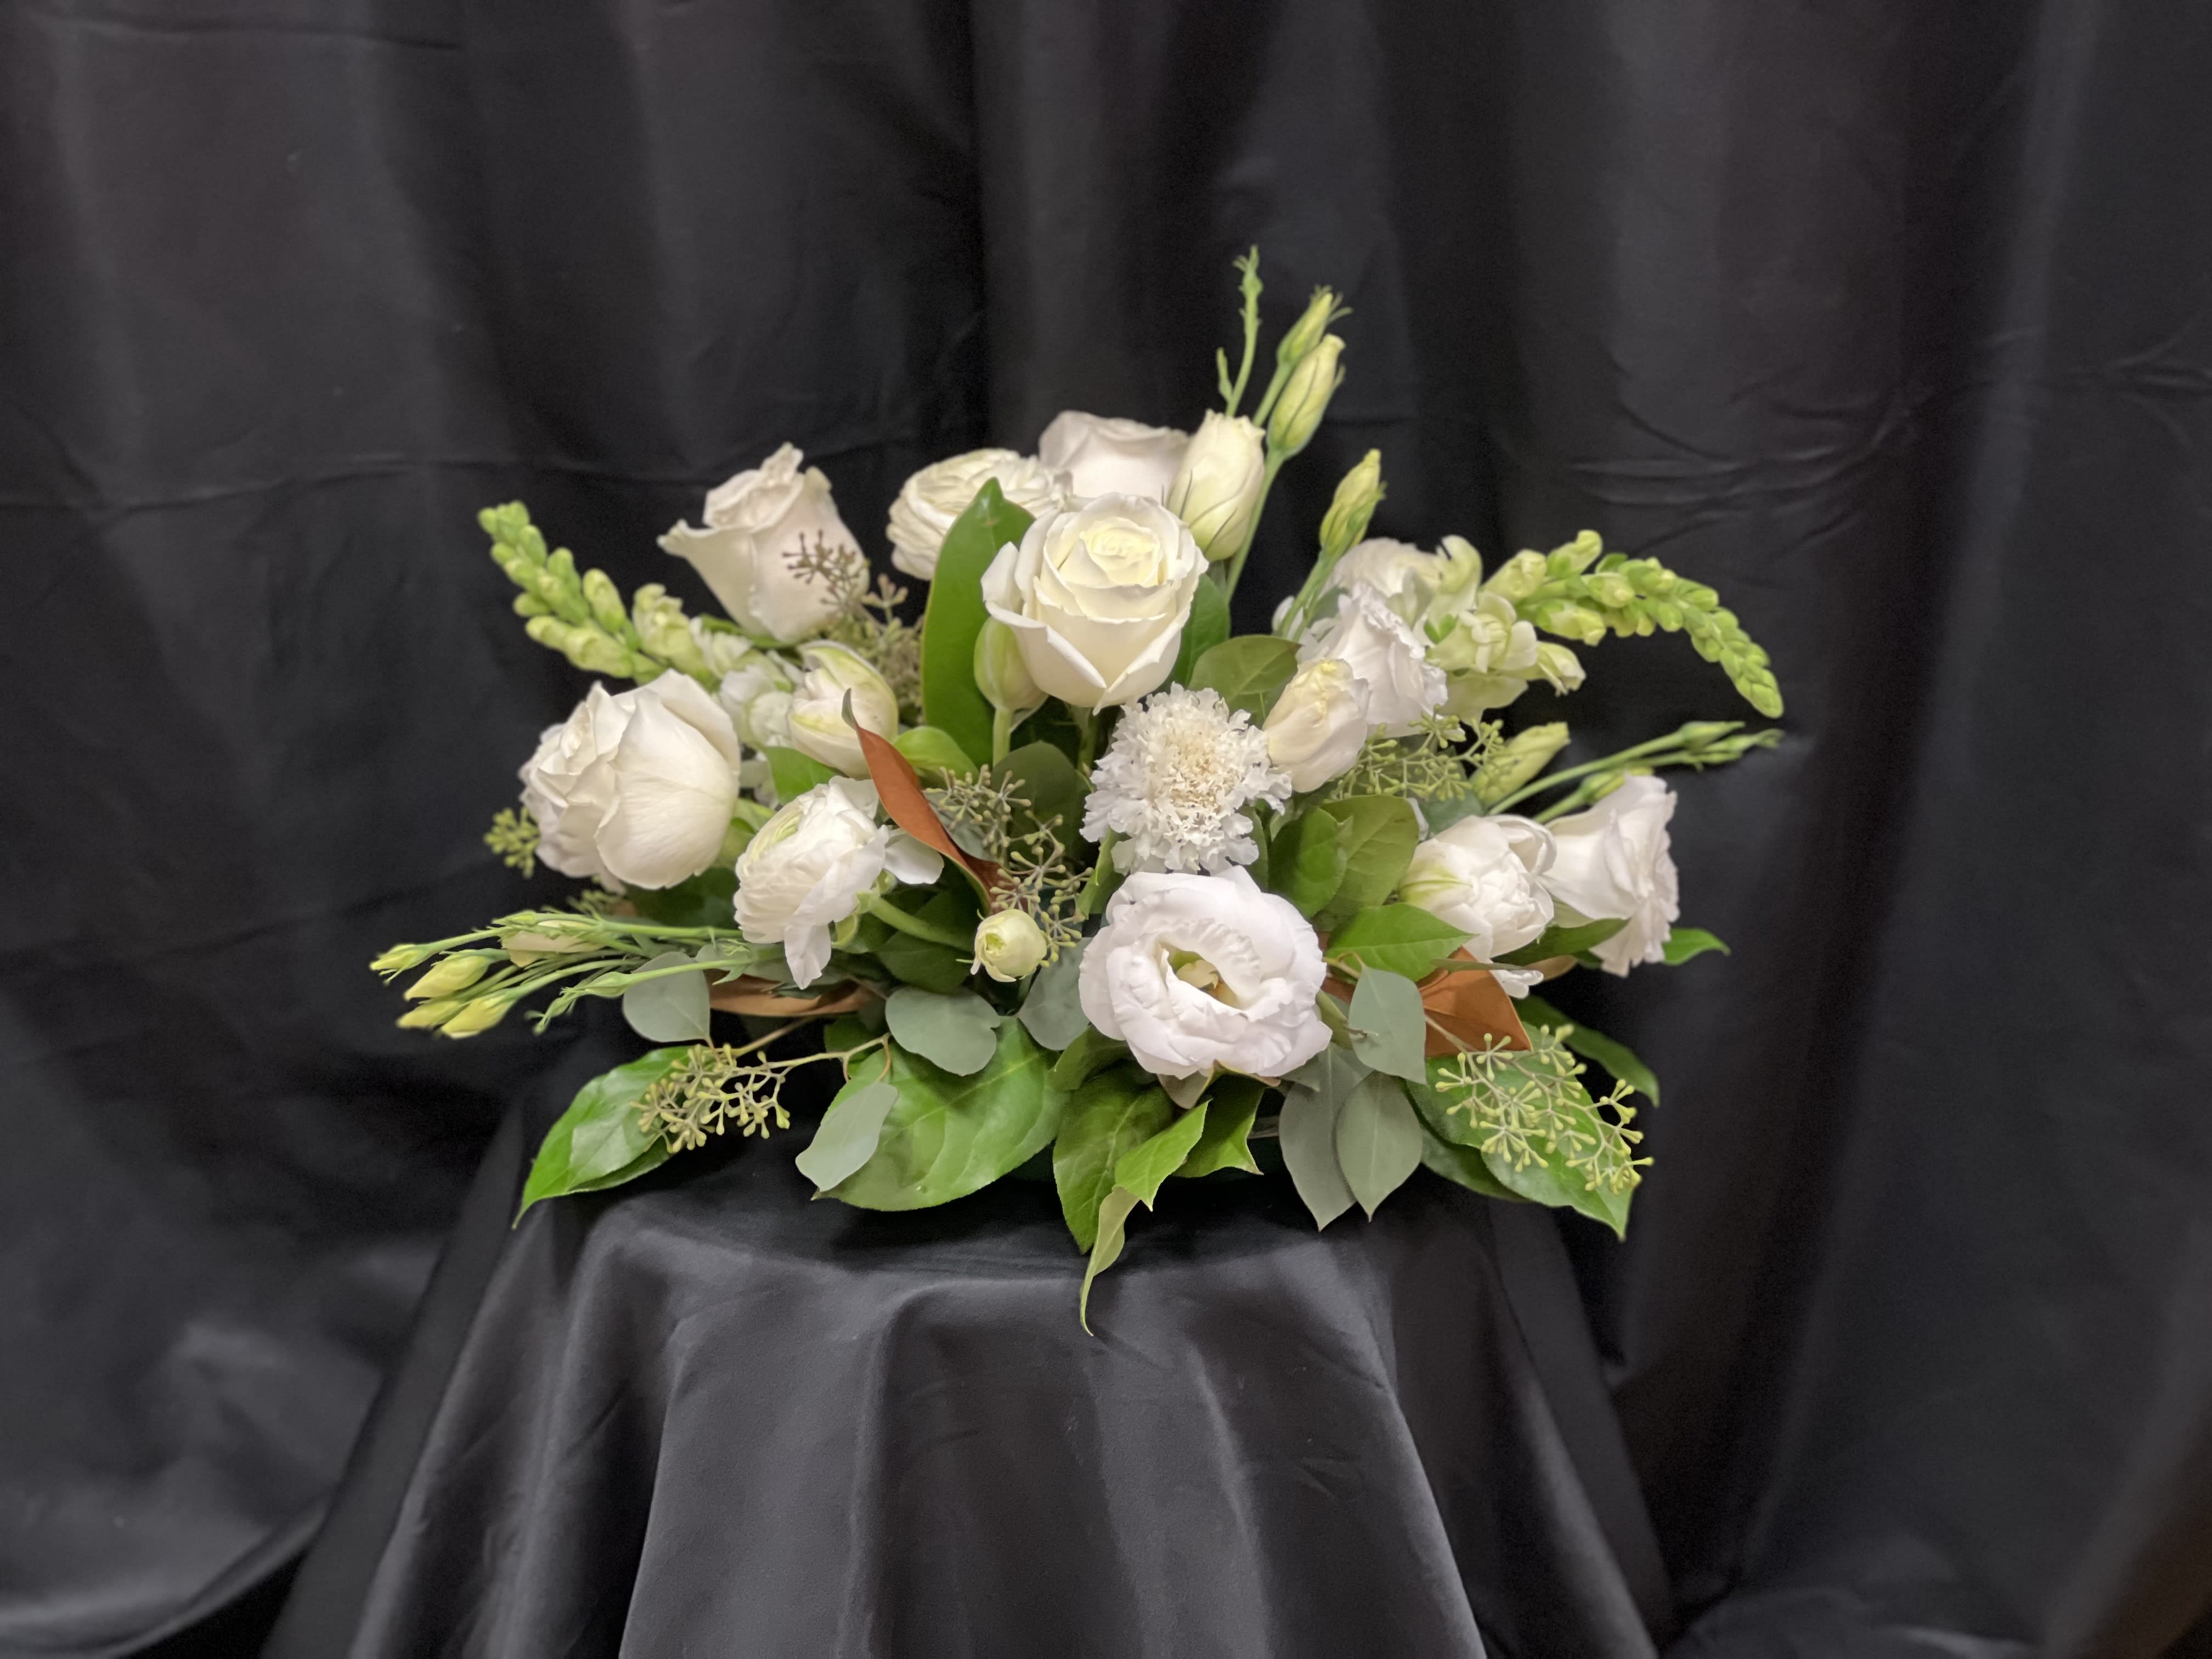 All white centerpiece  - Roses, Snopdragons, lisianthus, greens